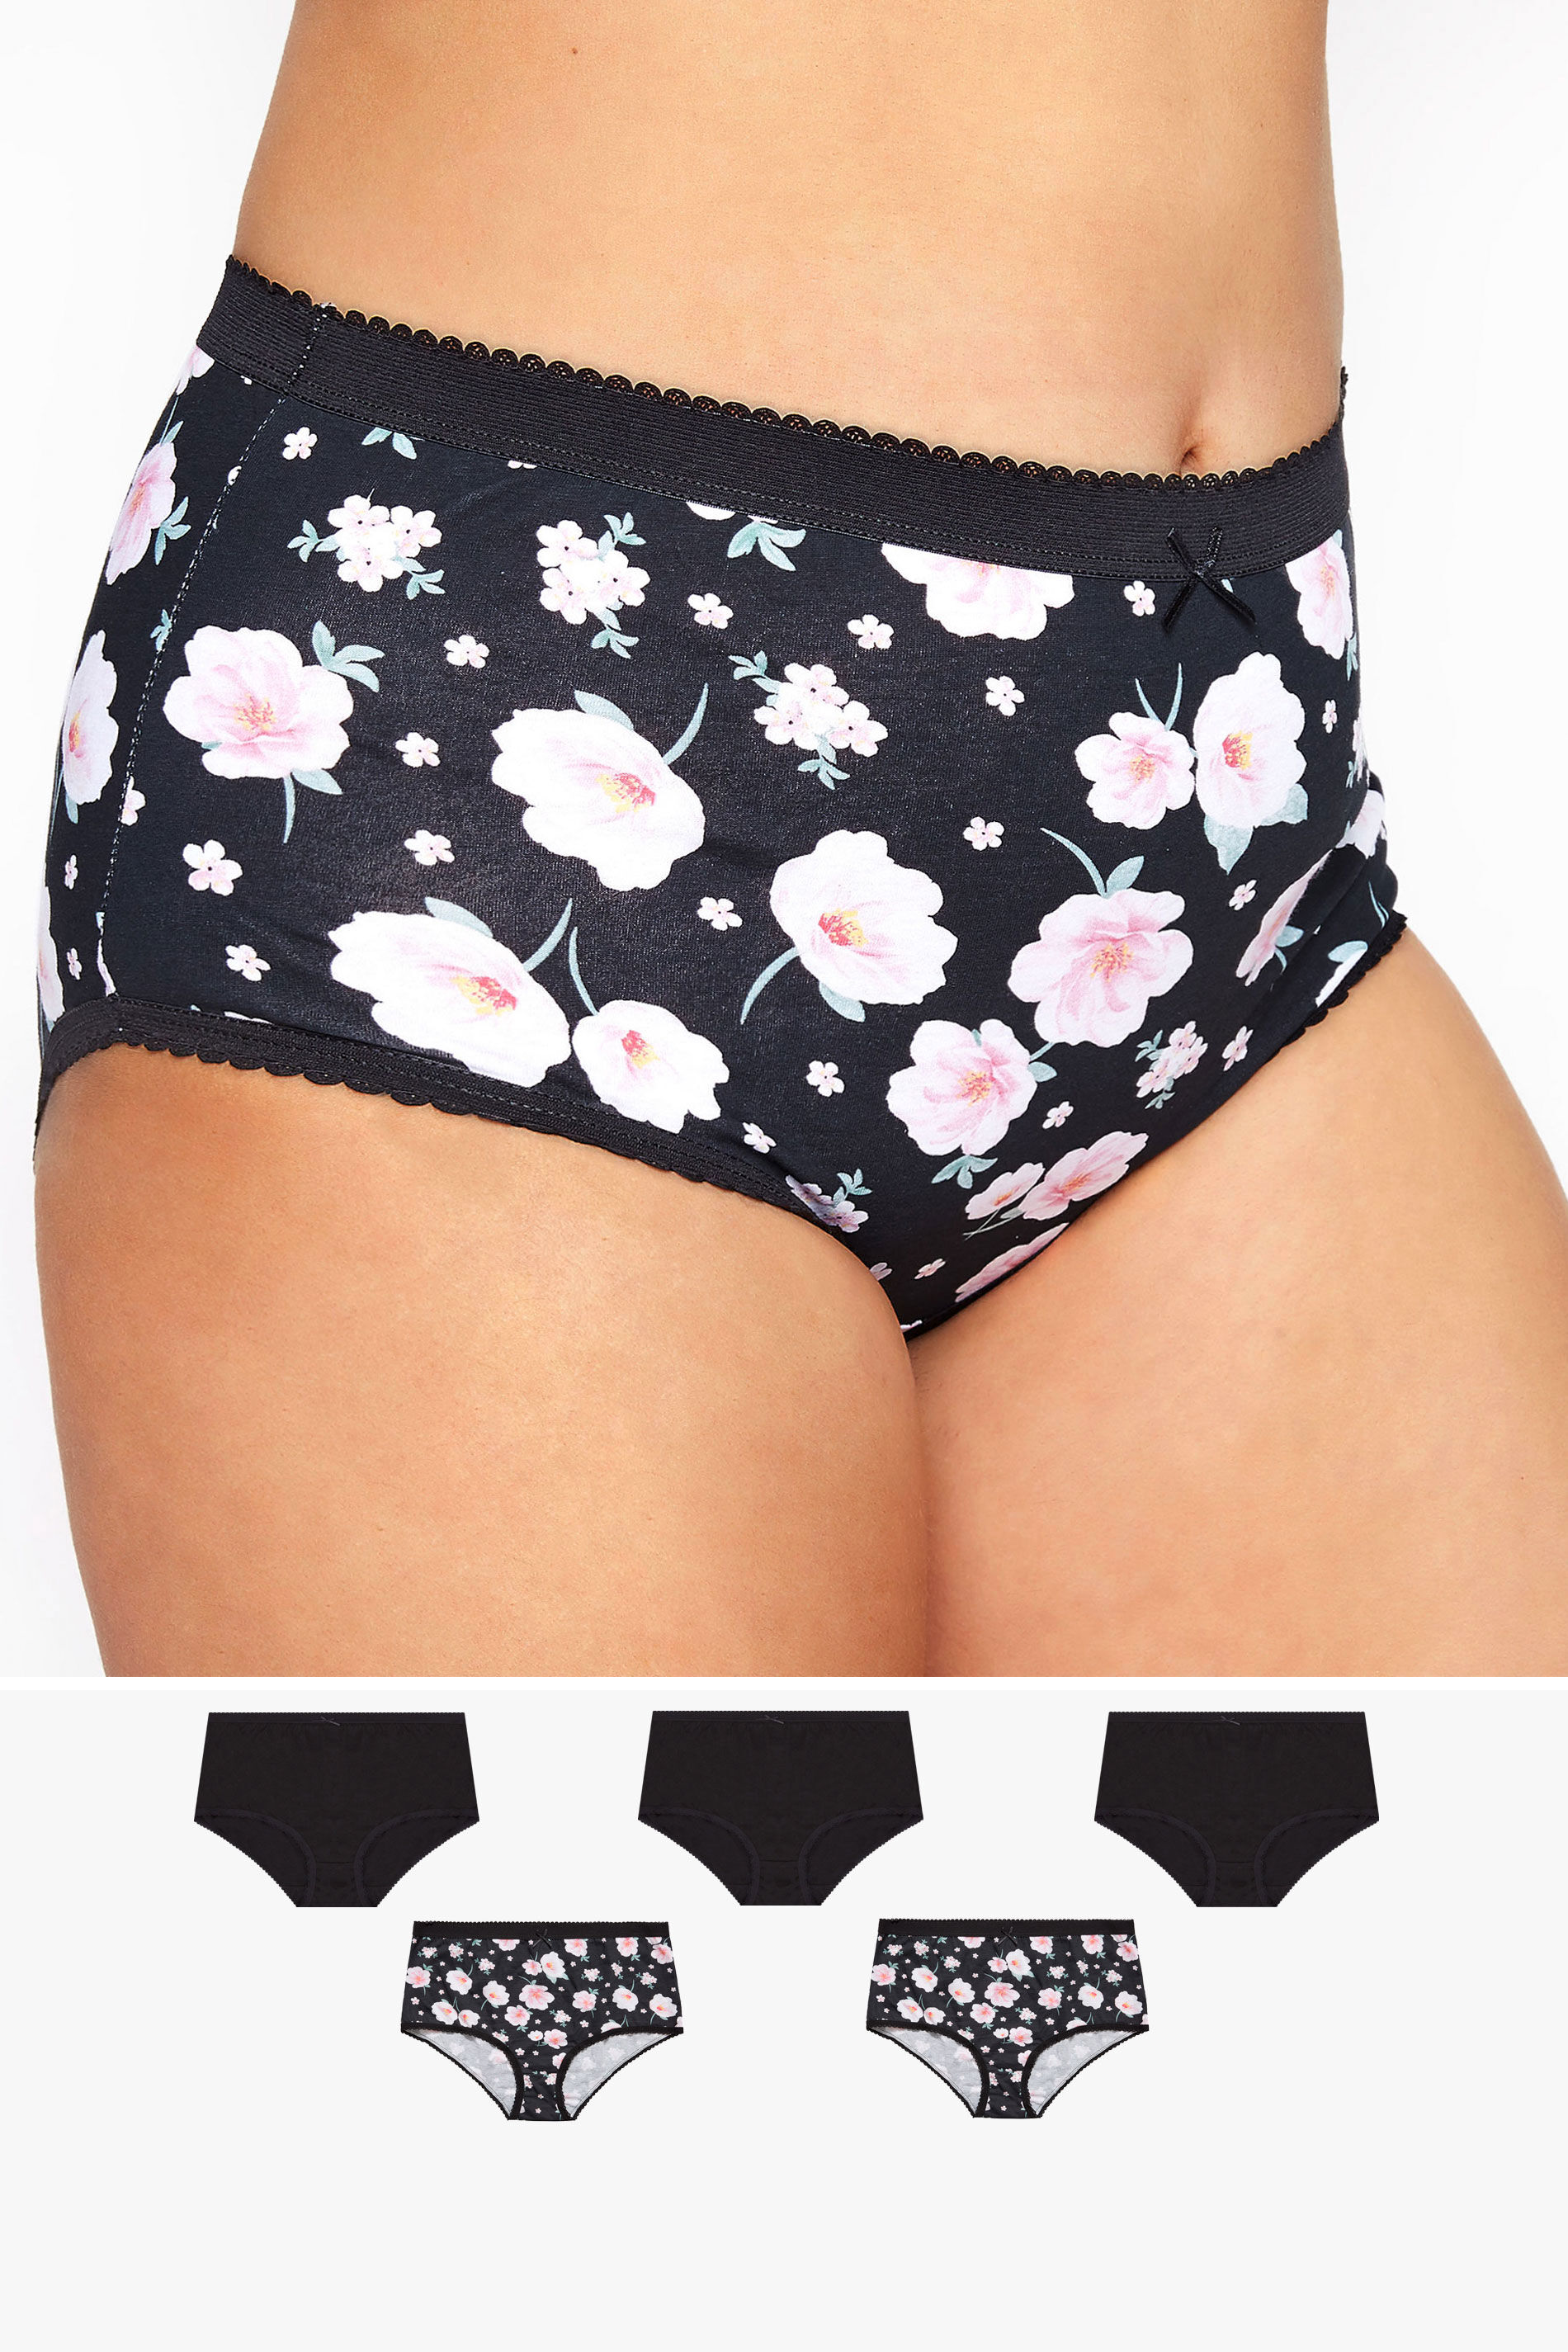 Yours Clothing 5 pack black large floral print full briefs